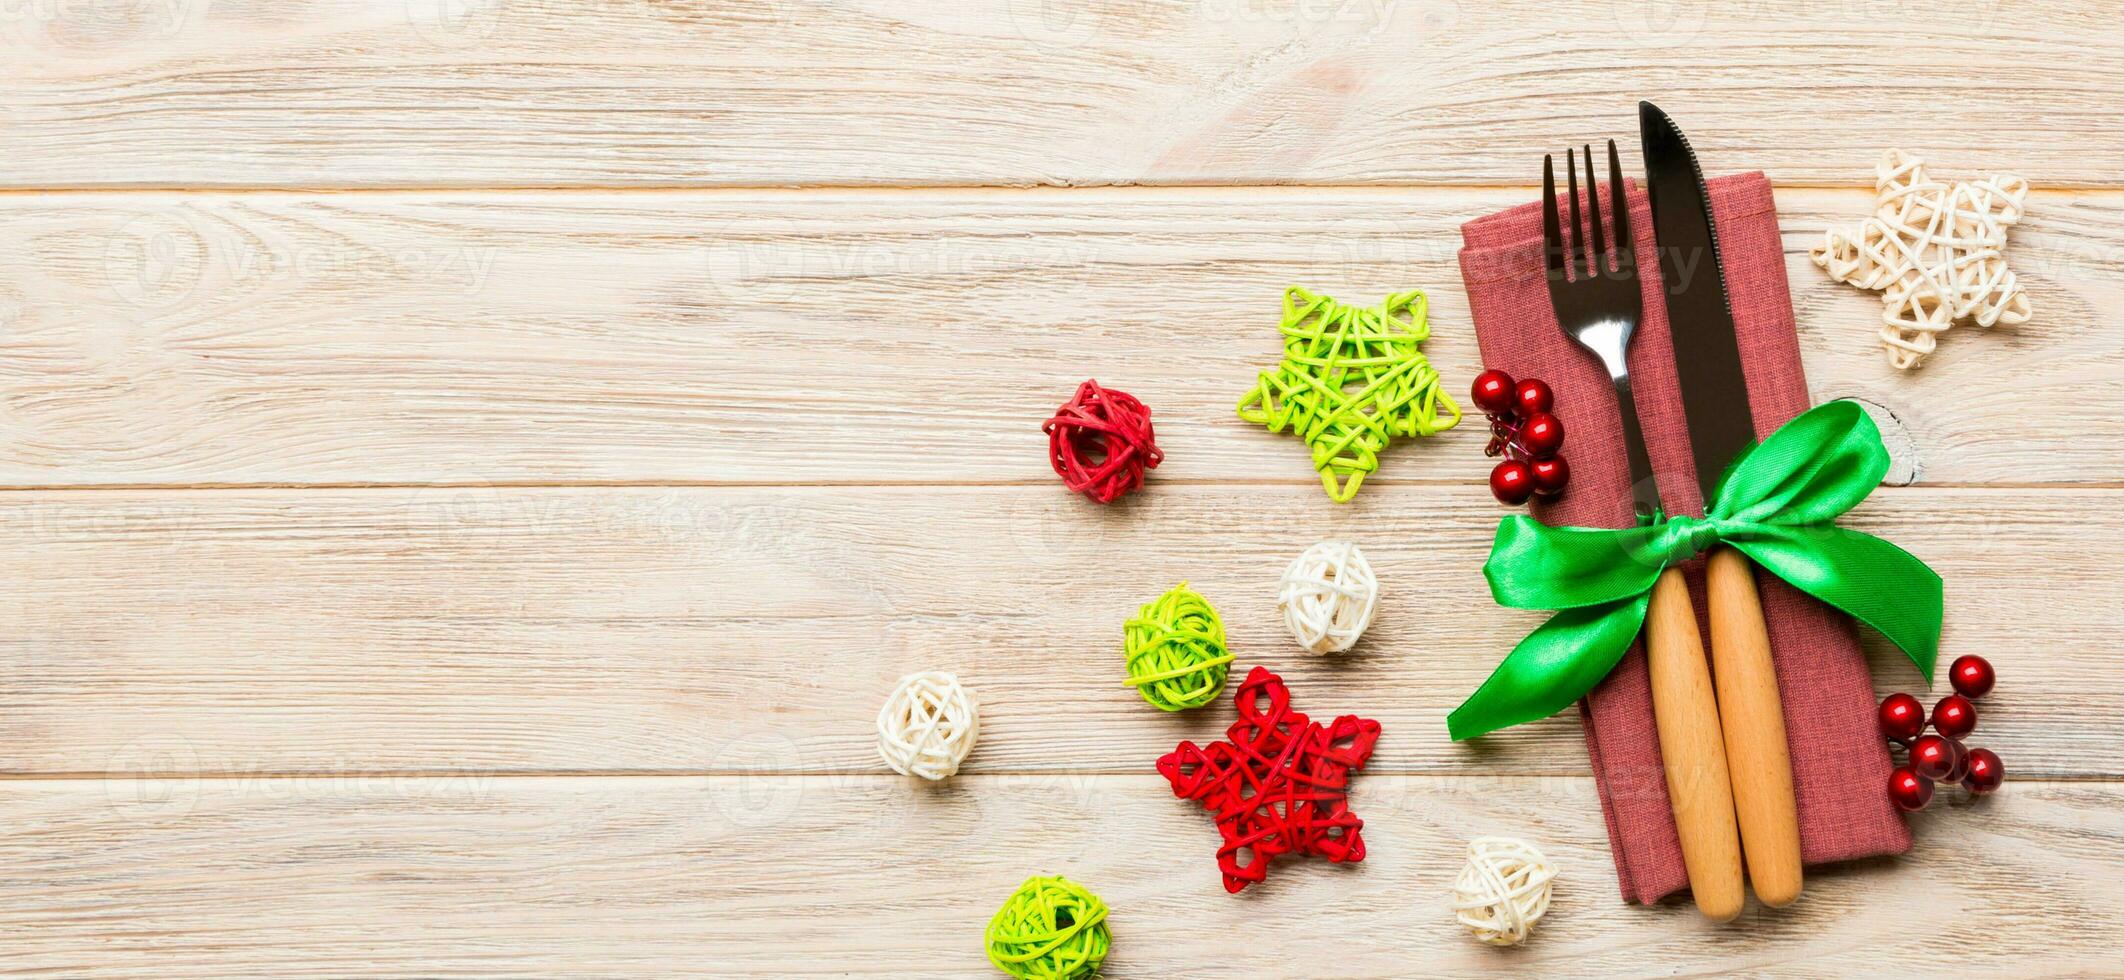 Banner top view of holiday set of fork and knife on wooden background. Christmas decorations and toys with copy space. New Year Eve concept photo